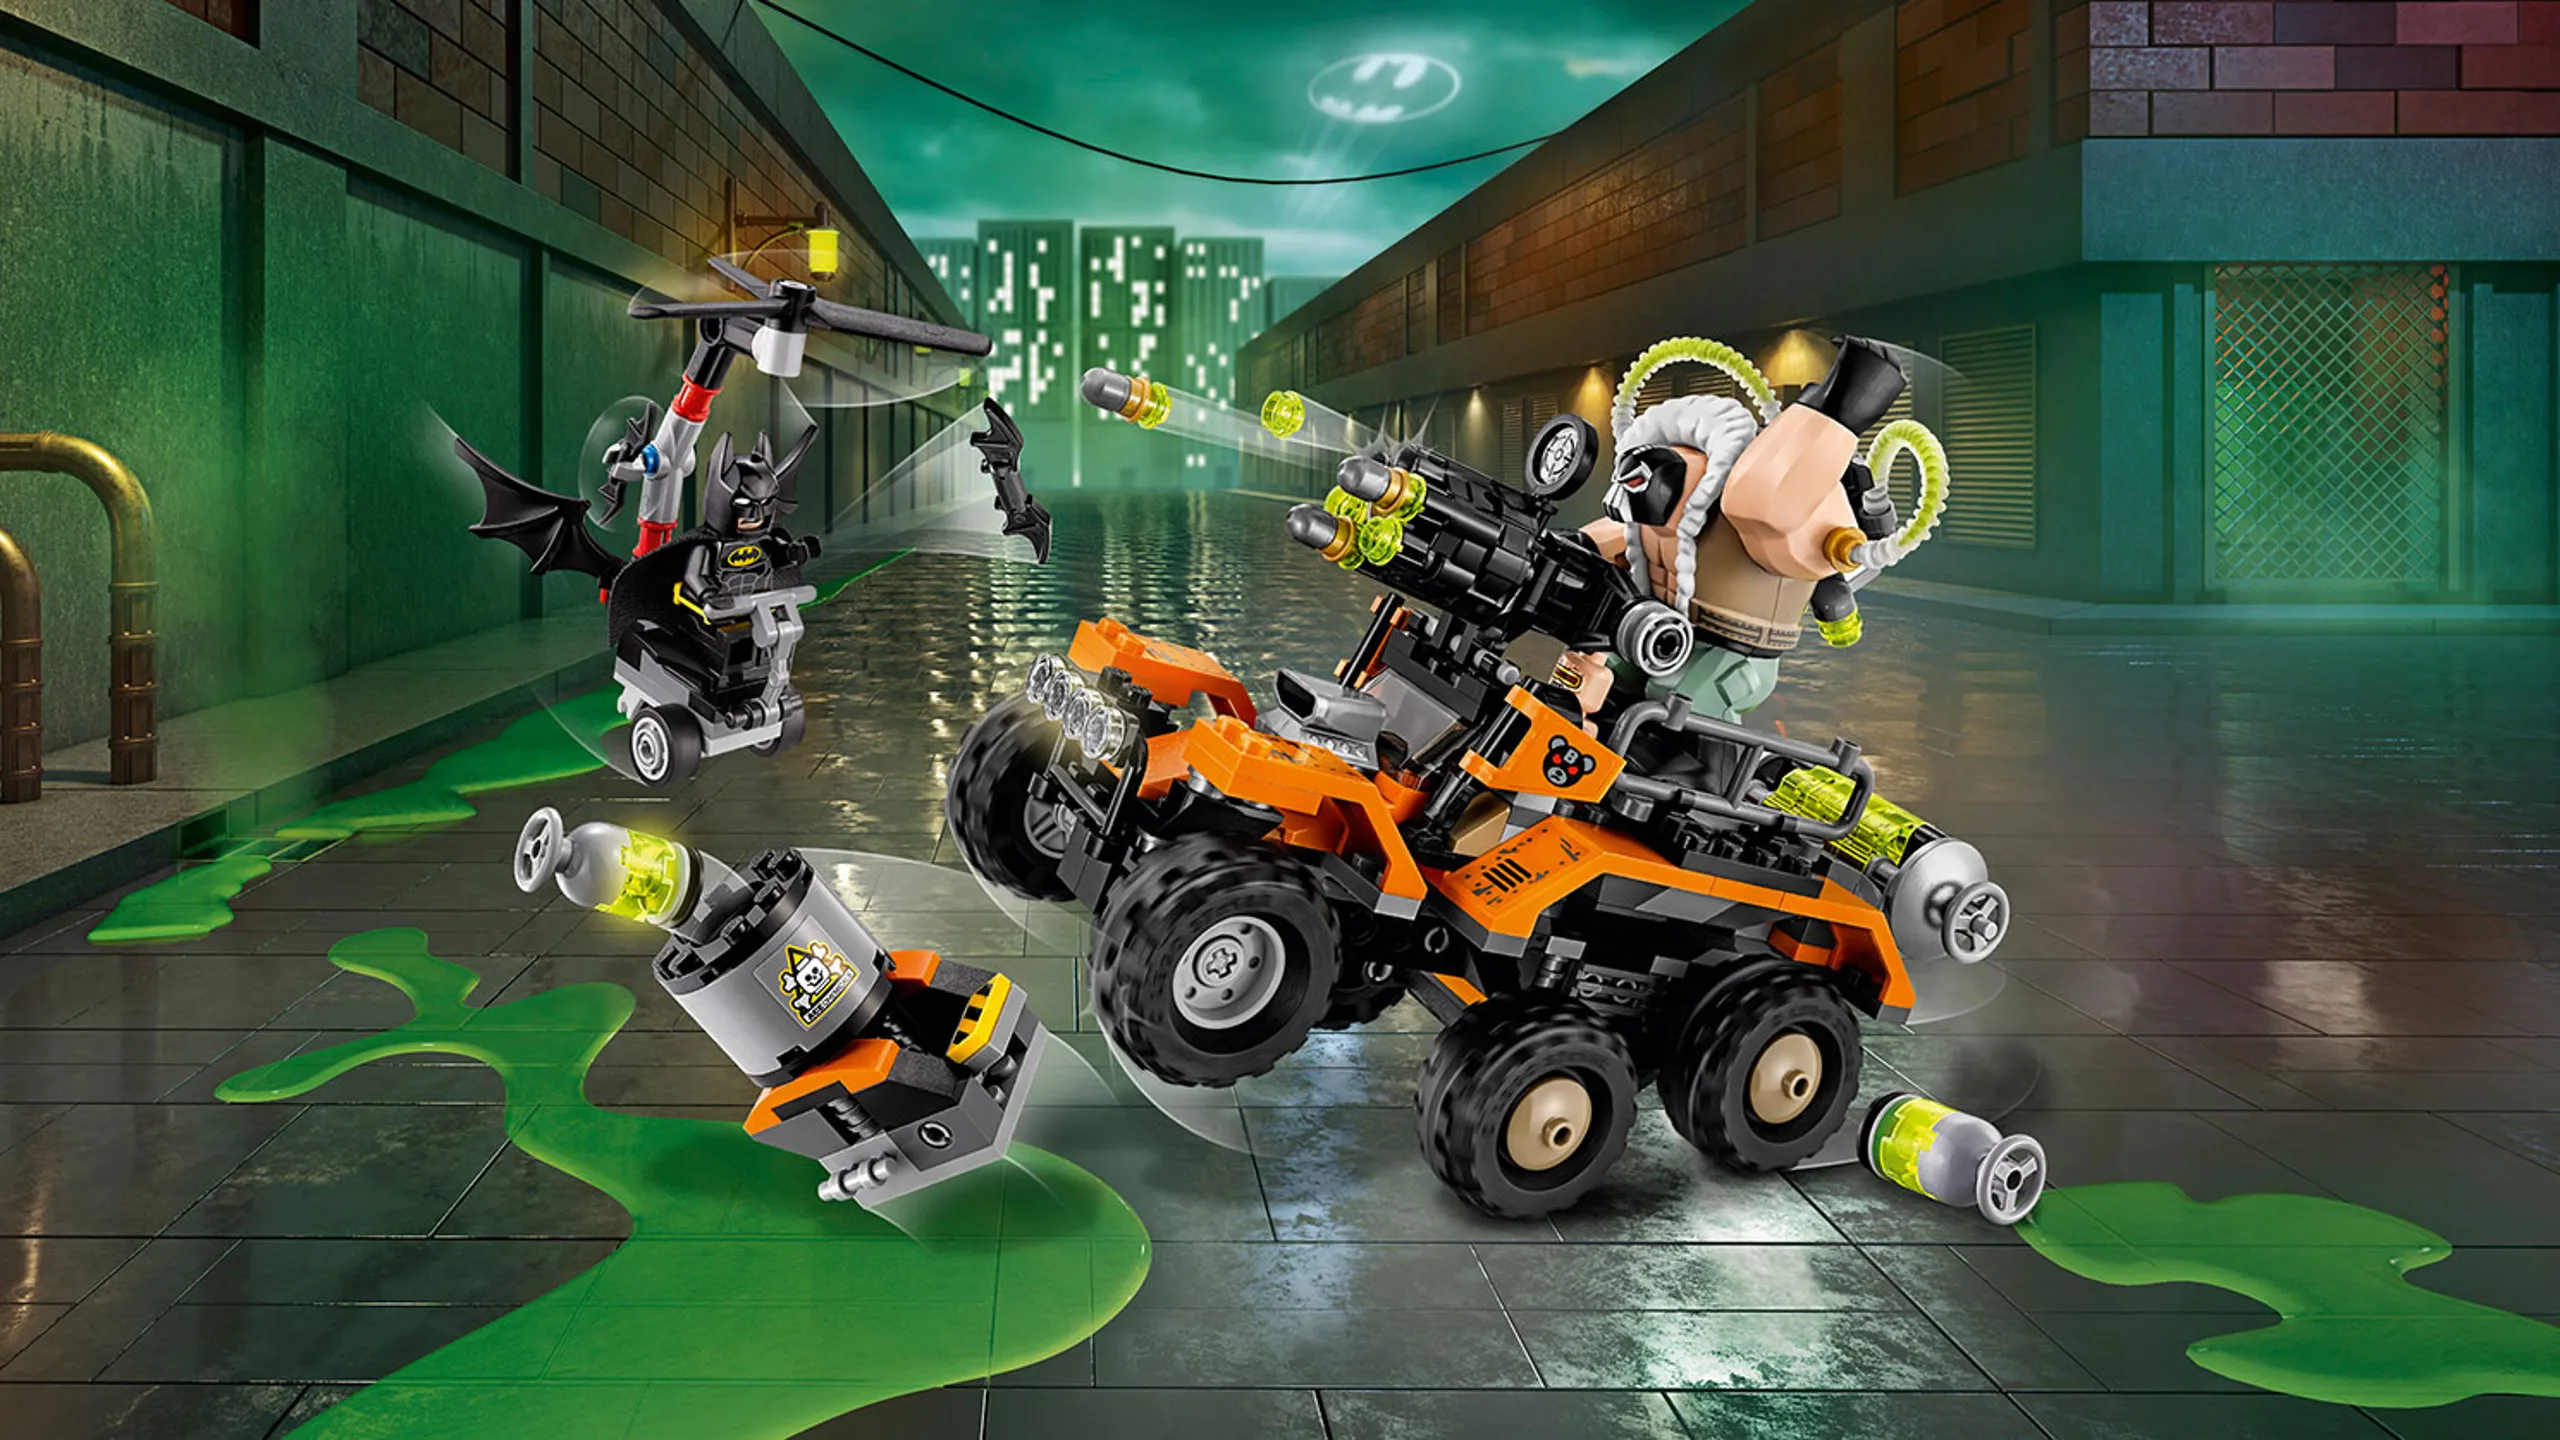 LEGO Batman Movie Bane Toxic Truck Attack - 70914 - Batman in his Whirly-Bat tries to stop Bane from dropping the toxic tank and creating chaos and mutants.